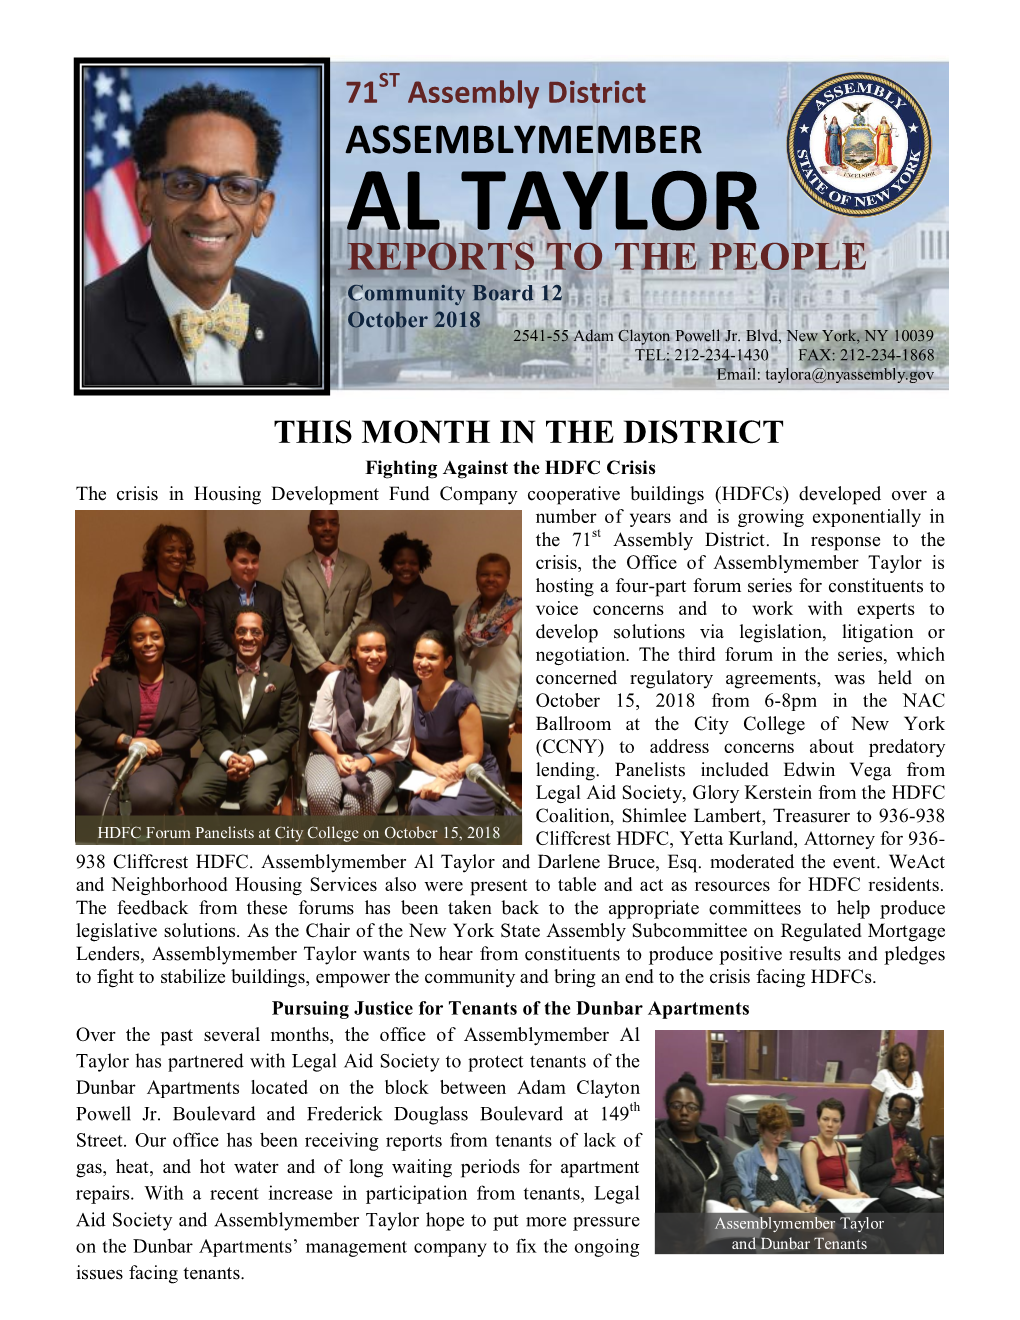 AL TAYLOR REPORTS to the PEOPLE Community Board 12